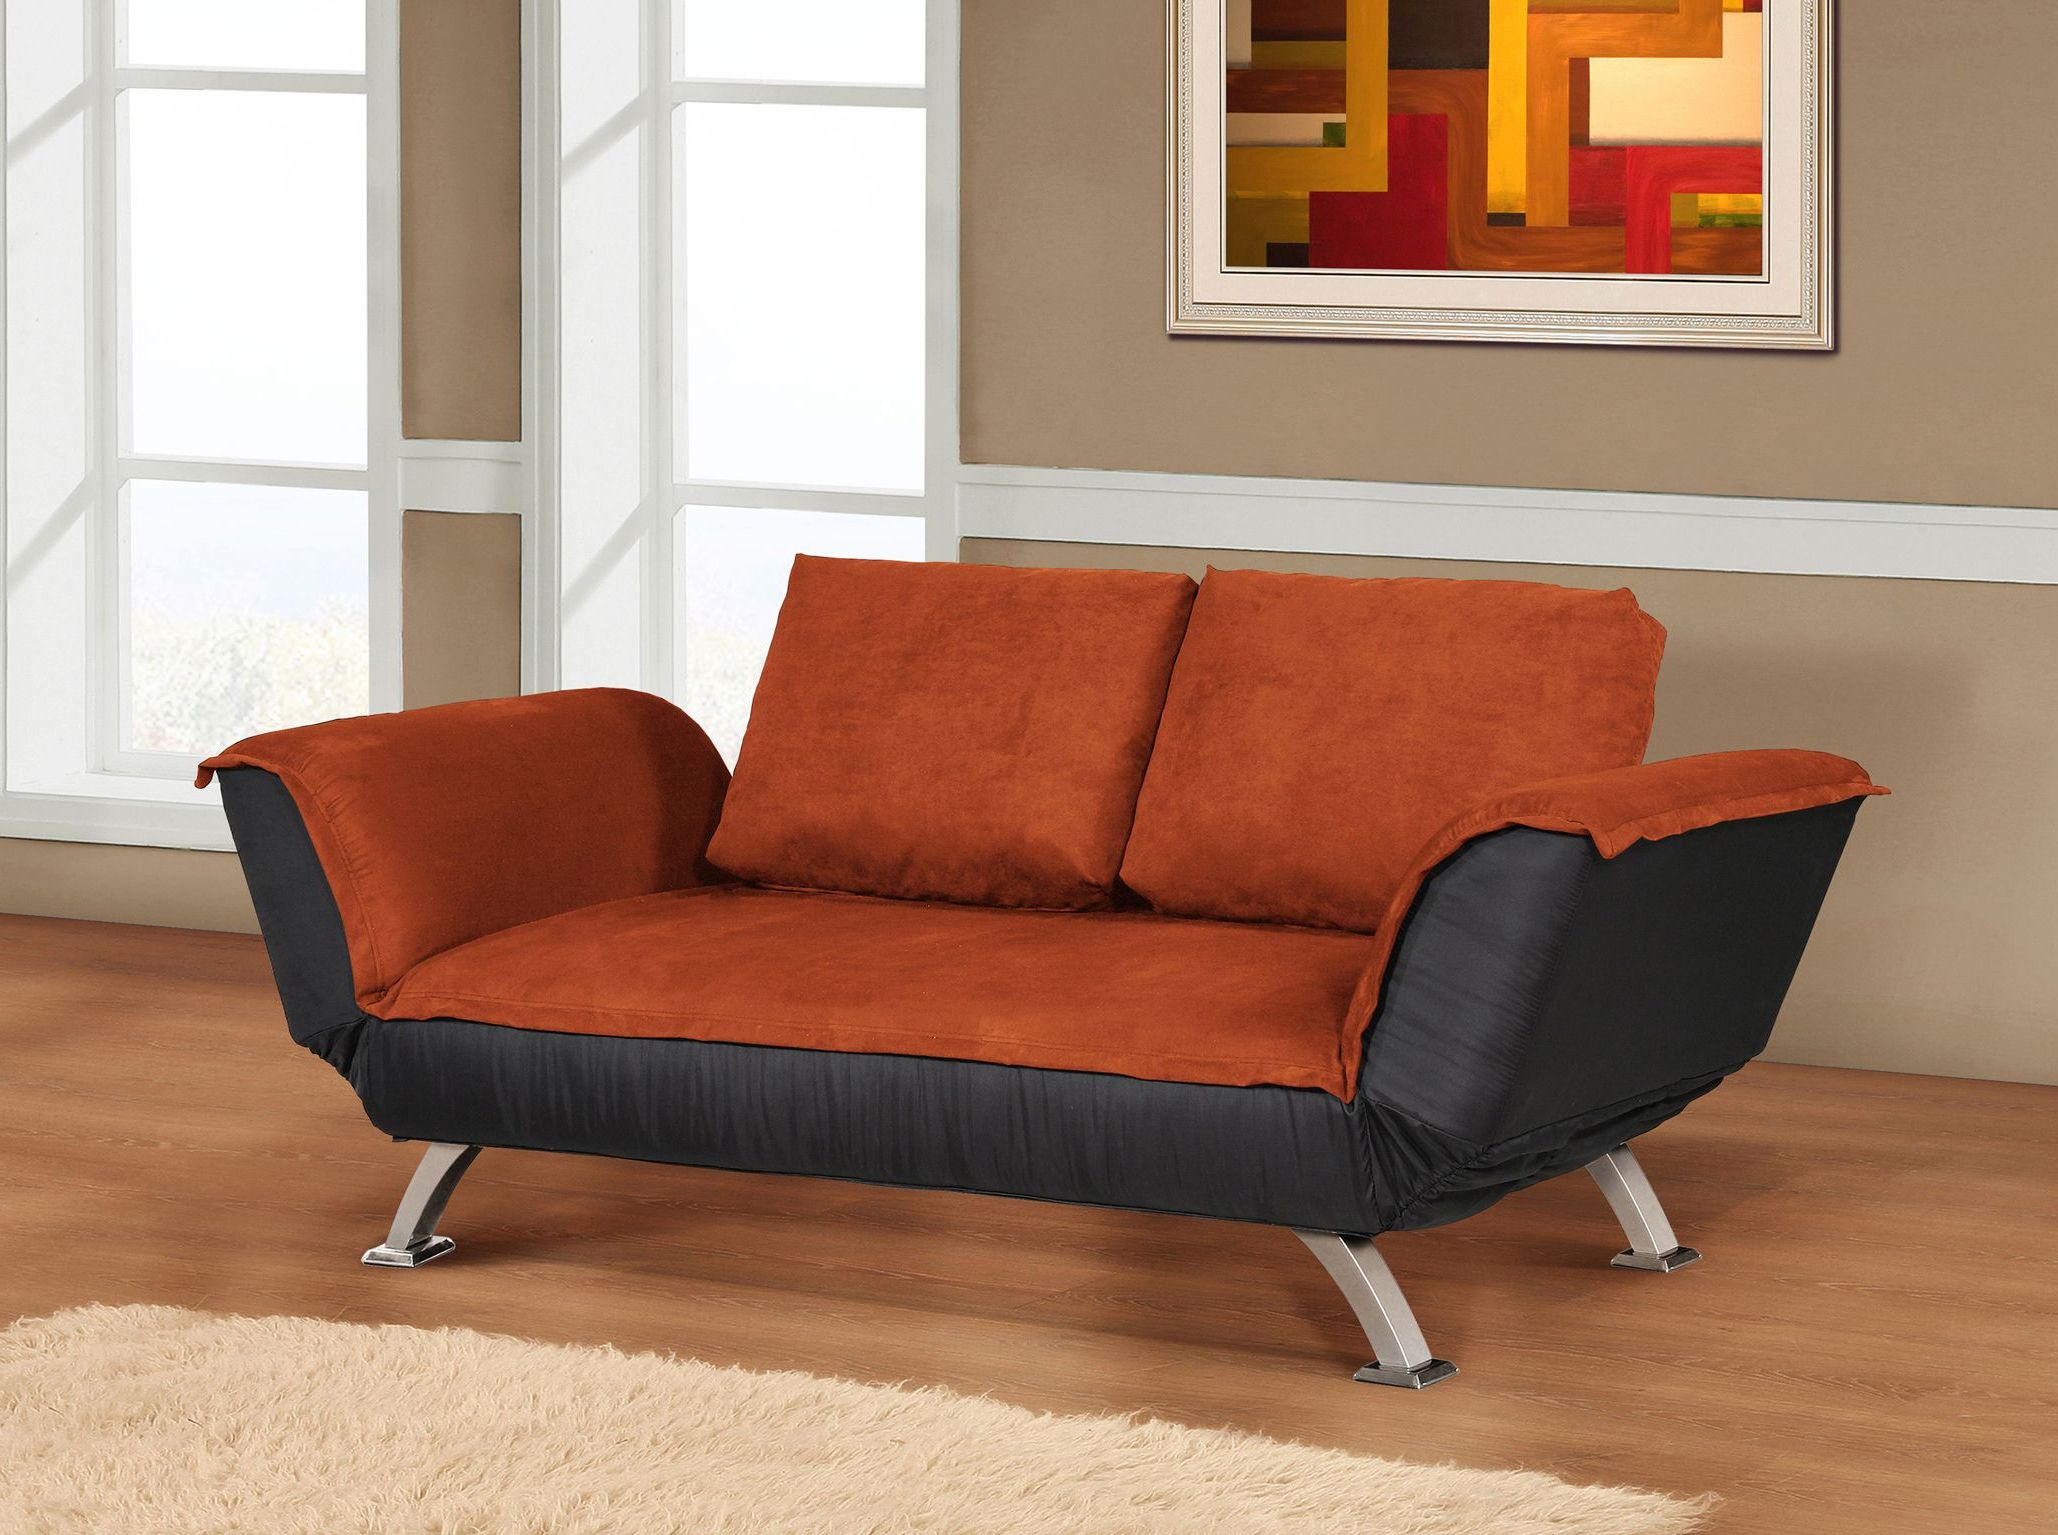 Sleeper Sofas For Small Spaces – What To Get For Your Stylish Home With Fashionable 8 Seat Convertible Sofas (View 12 of 15)